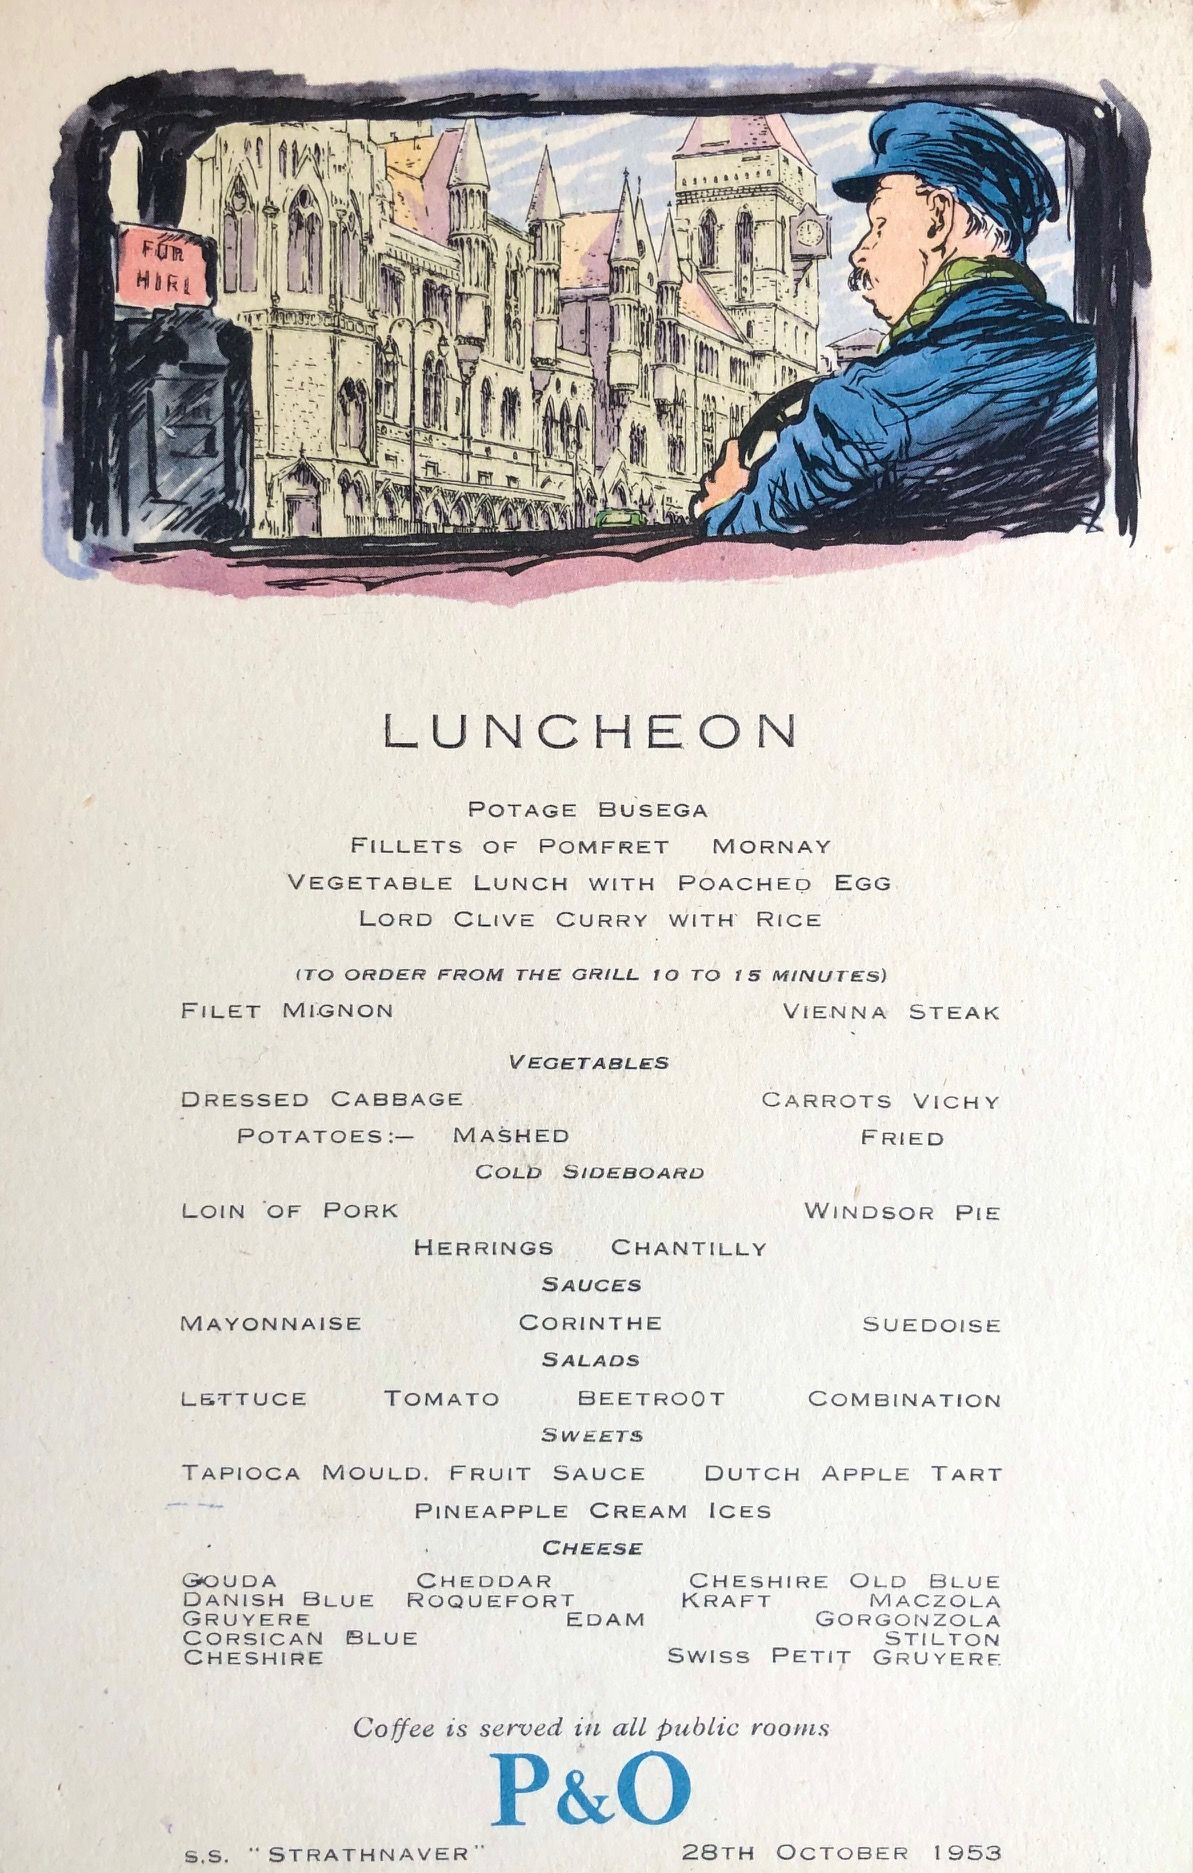 *NEW* P & O Lines. S.S. "Strathnaver" Luncheon Menu - The Law Courts